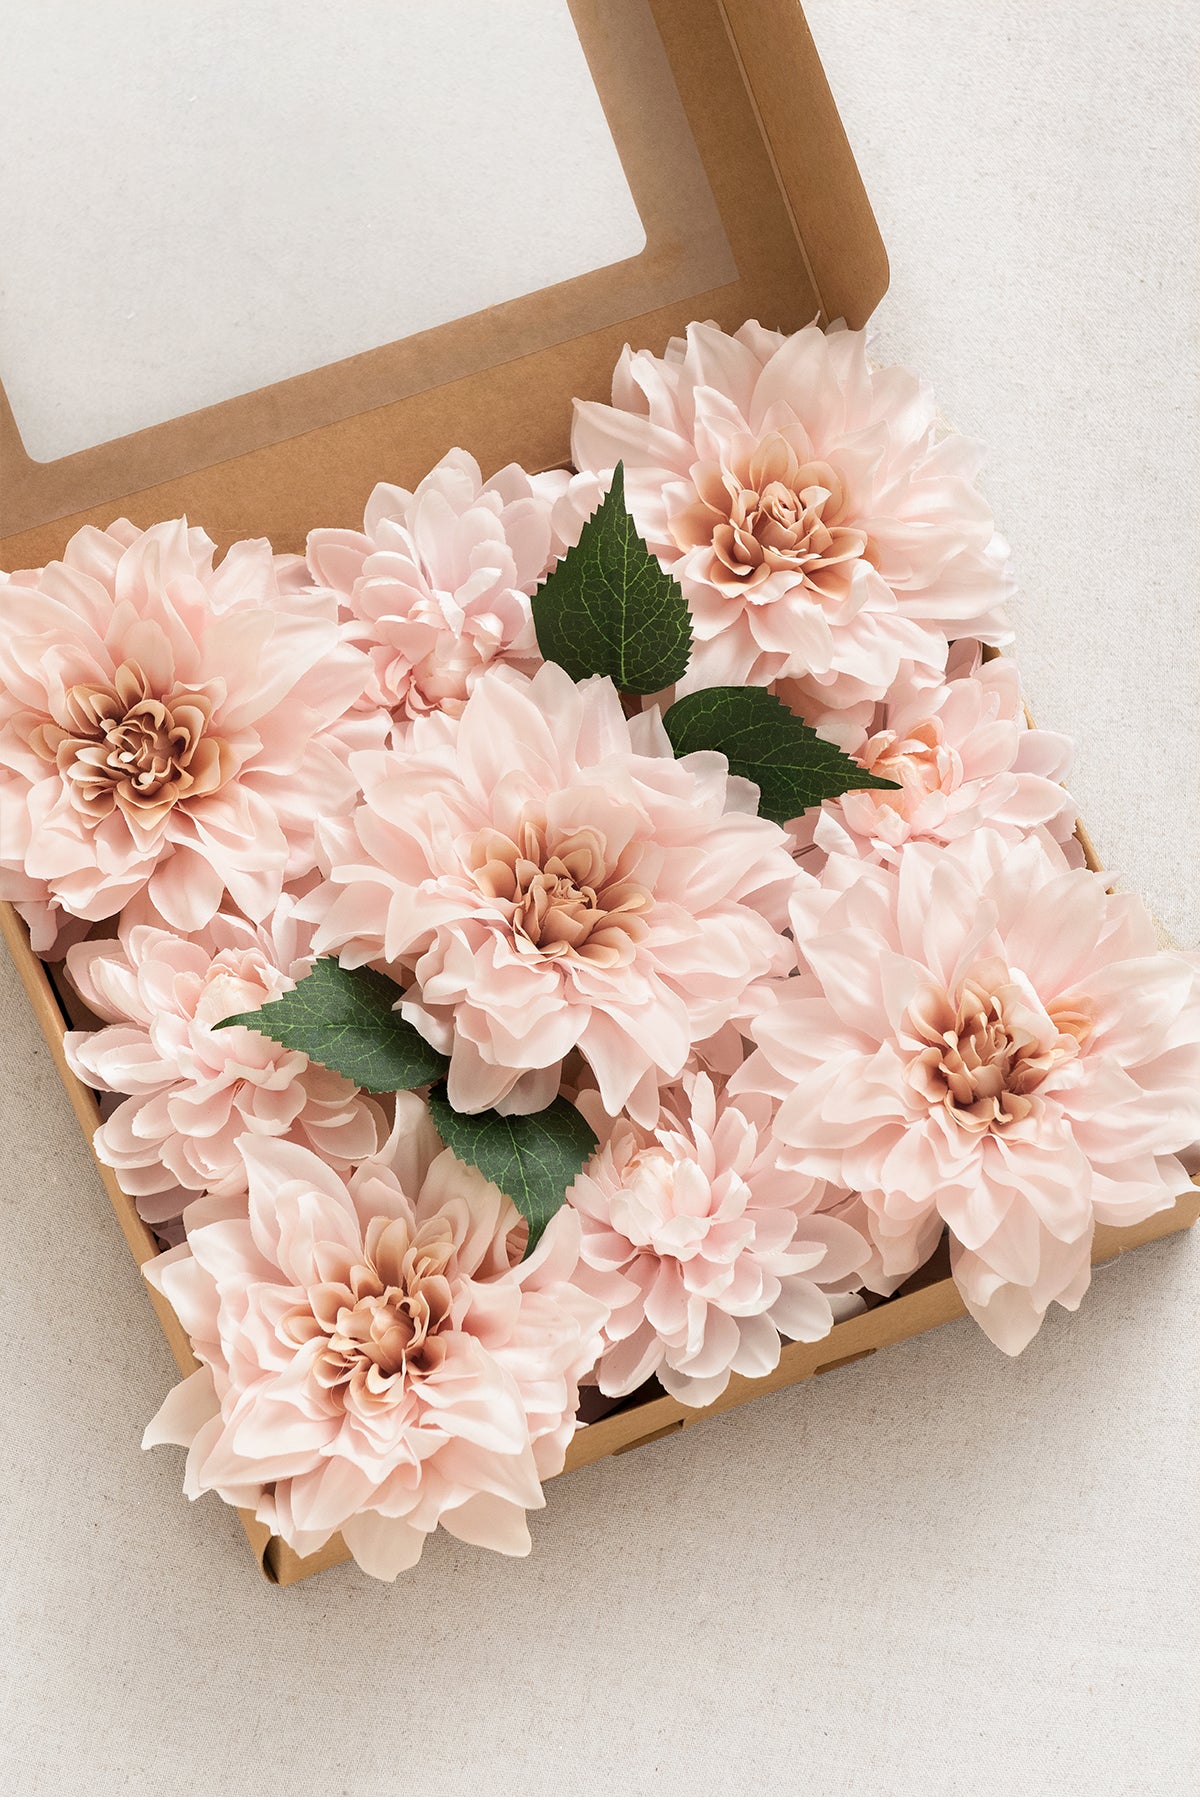 DIY Supporting Flower Boxes in Dusty Rose & Cream